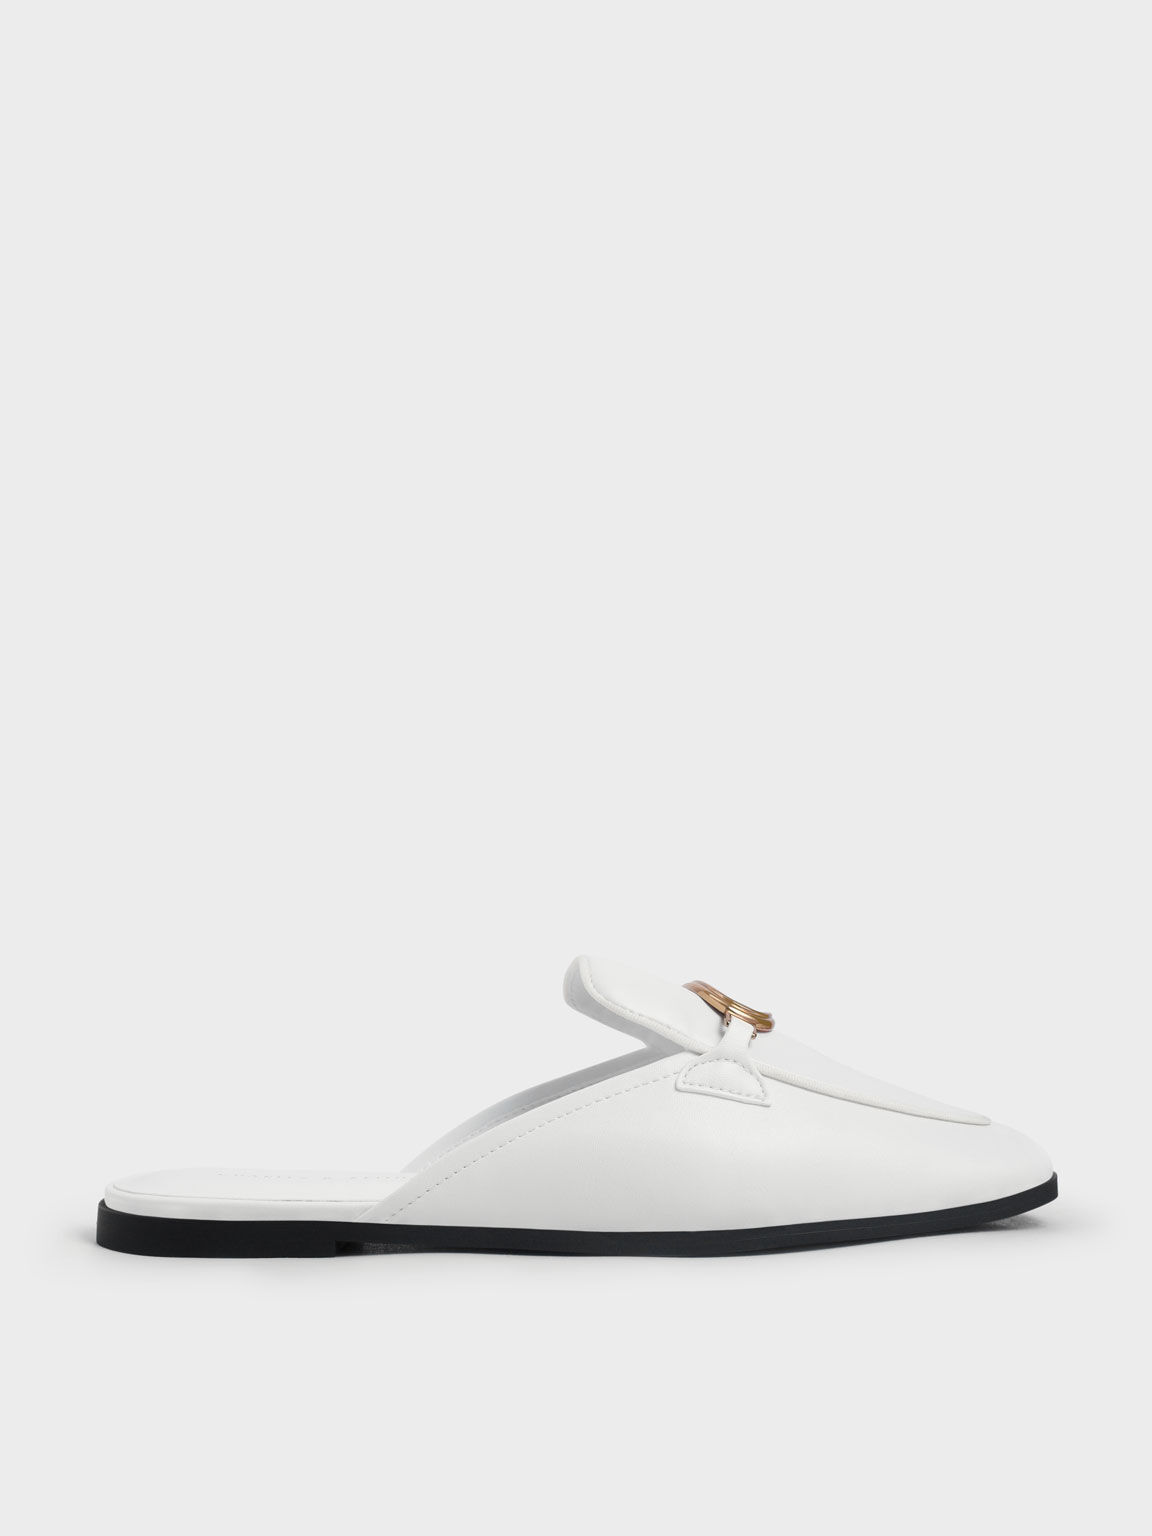 Metallic Accent Loafer Mules, White, hi-res